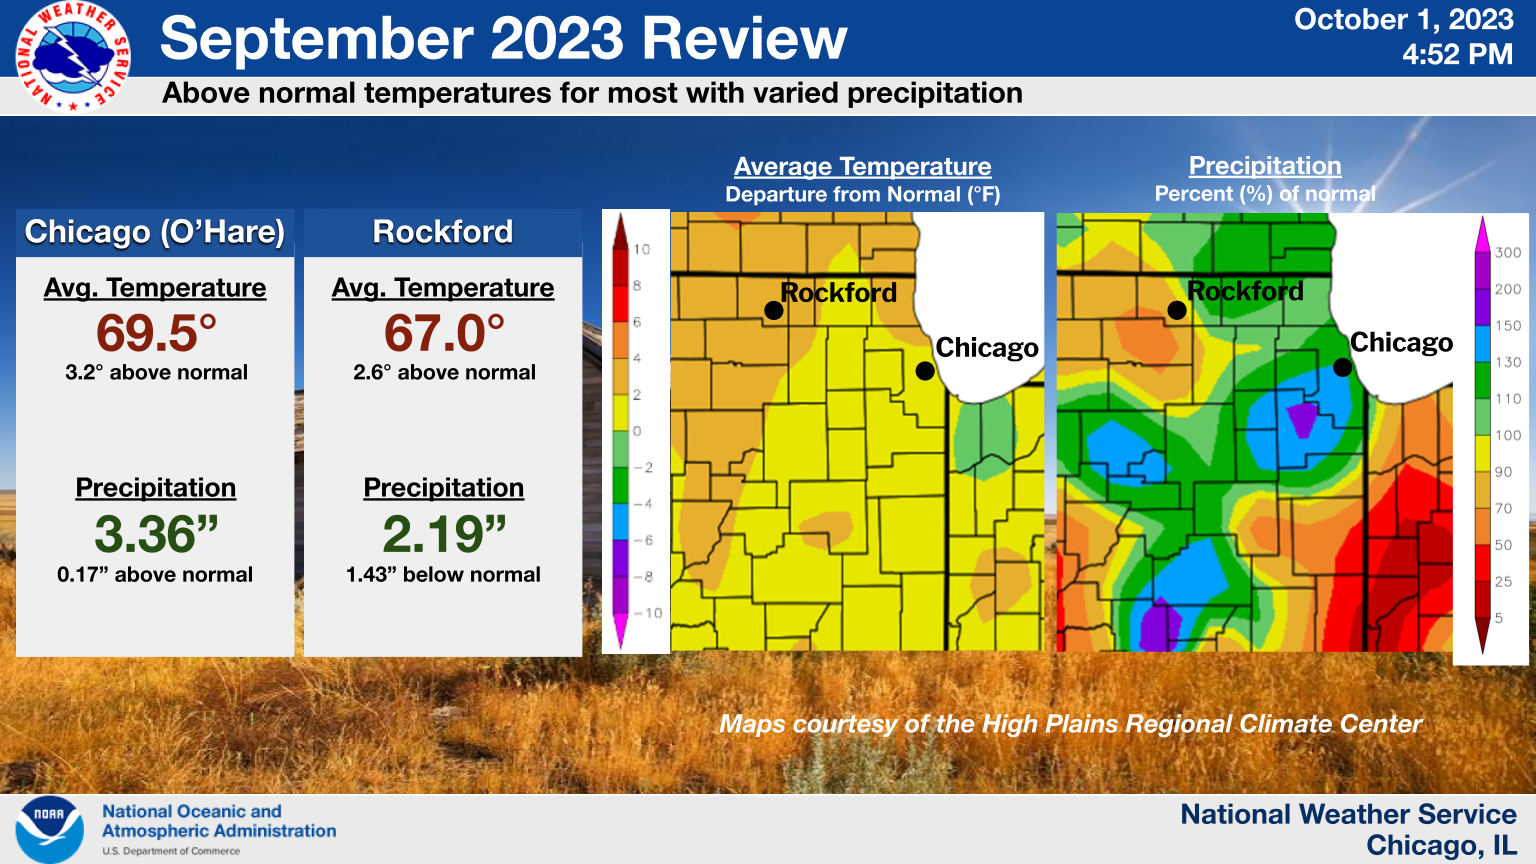 Headline: September 2023 Review.  Sub Headline: Above normal temperatures for most with varied precipitation. In September 2023 Chicago (O'Hare) saw an average temperature of 69.5 F which is 3.2 F above normal and 3.36 inches of precipitation which is 0.17 inches above normal. Rockford saw an average temperature of 67.0 F which is 2.6 F above average and 2.19 inches of precipitation which is 1.43 inches below normal.   Graphic Created: Sunday, October 1, 2023 4:31 PM CDT